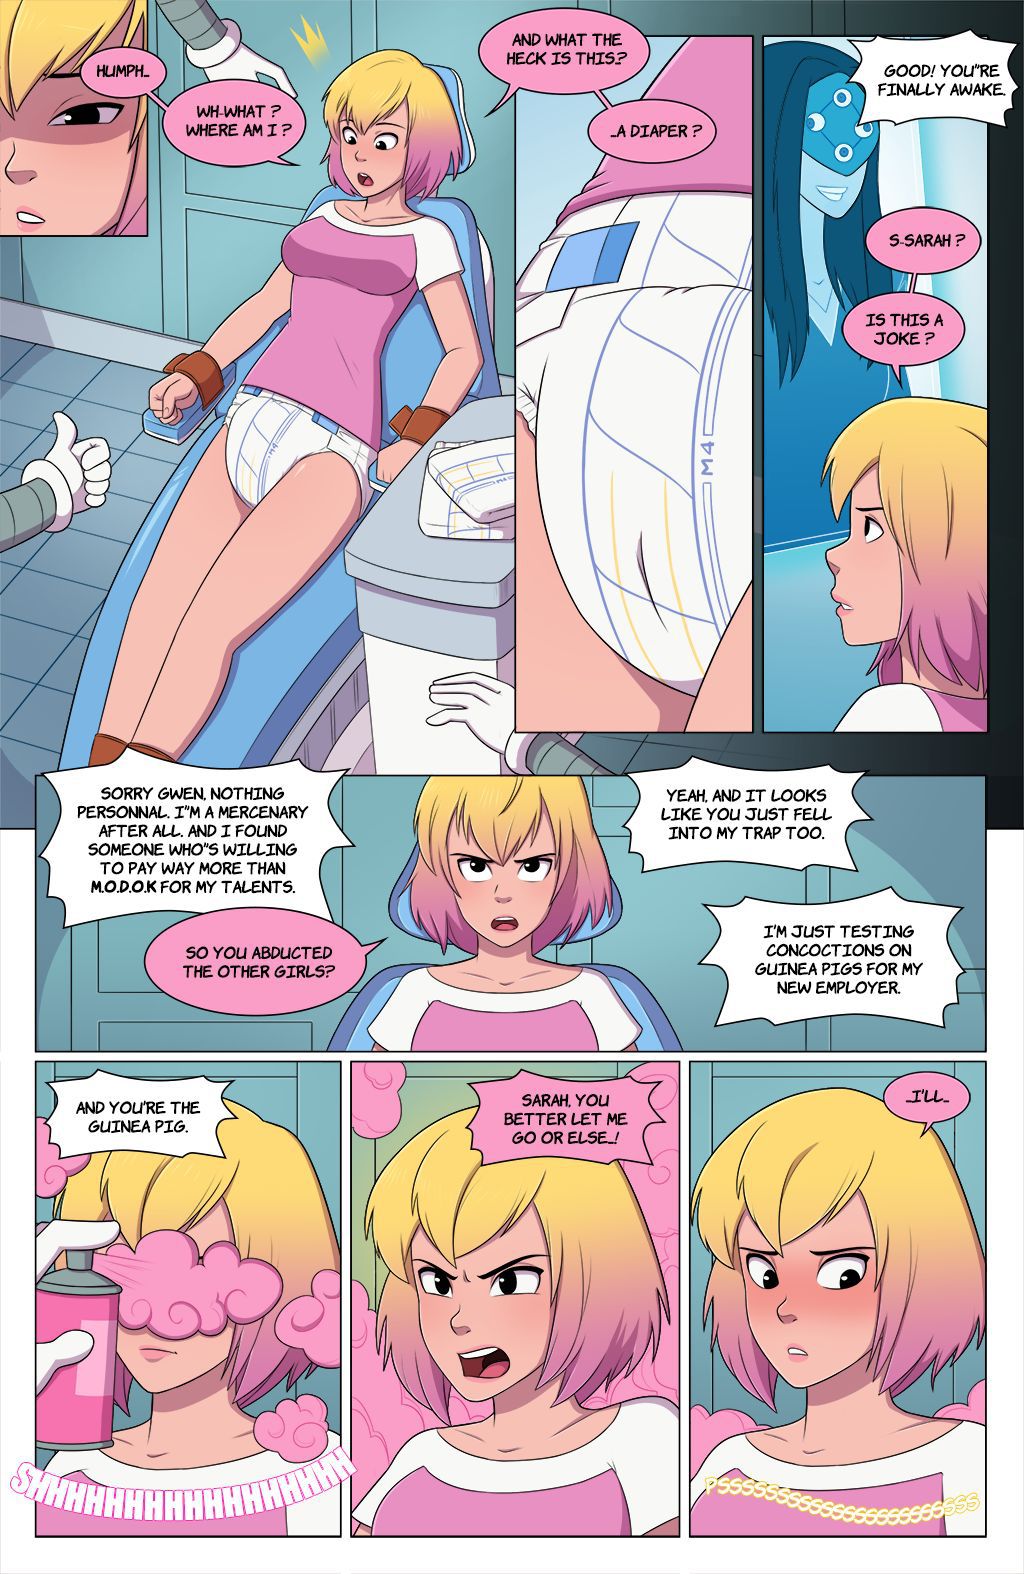 [PieceofSoap] Shits and Giggles (Gwenpool) [Ongoing] 5